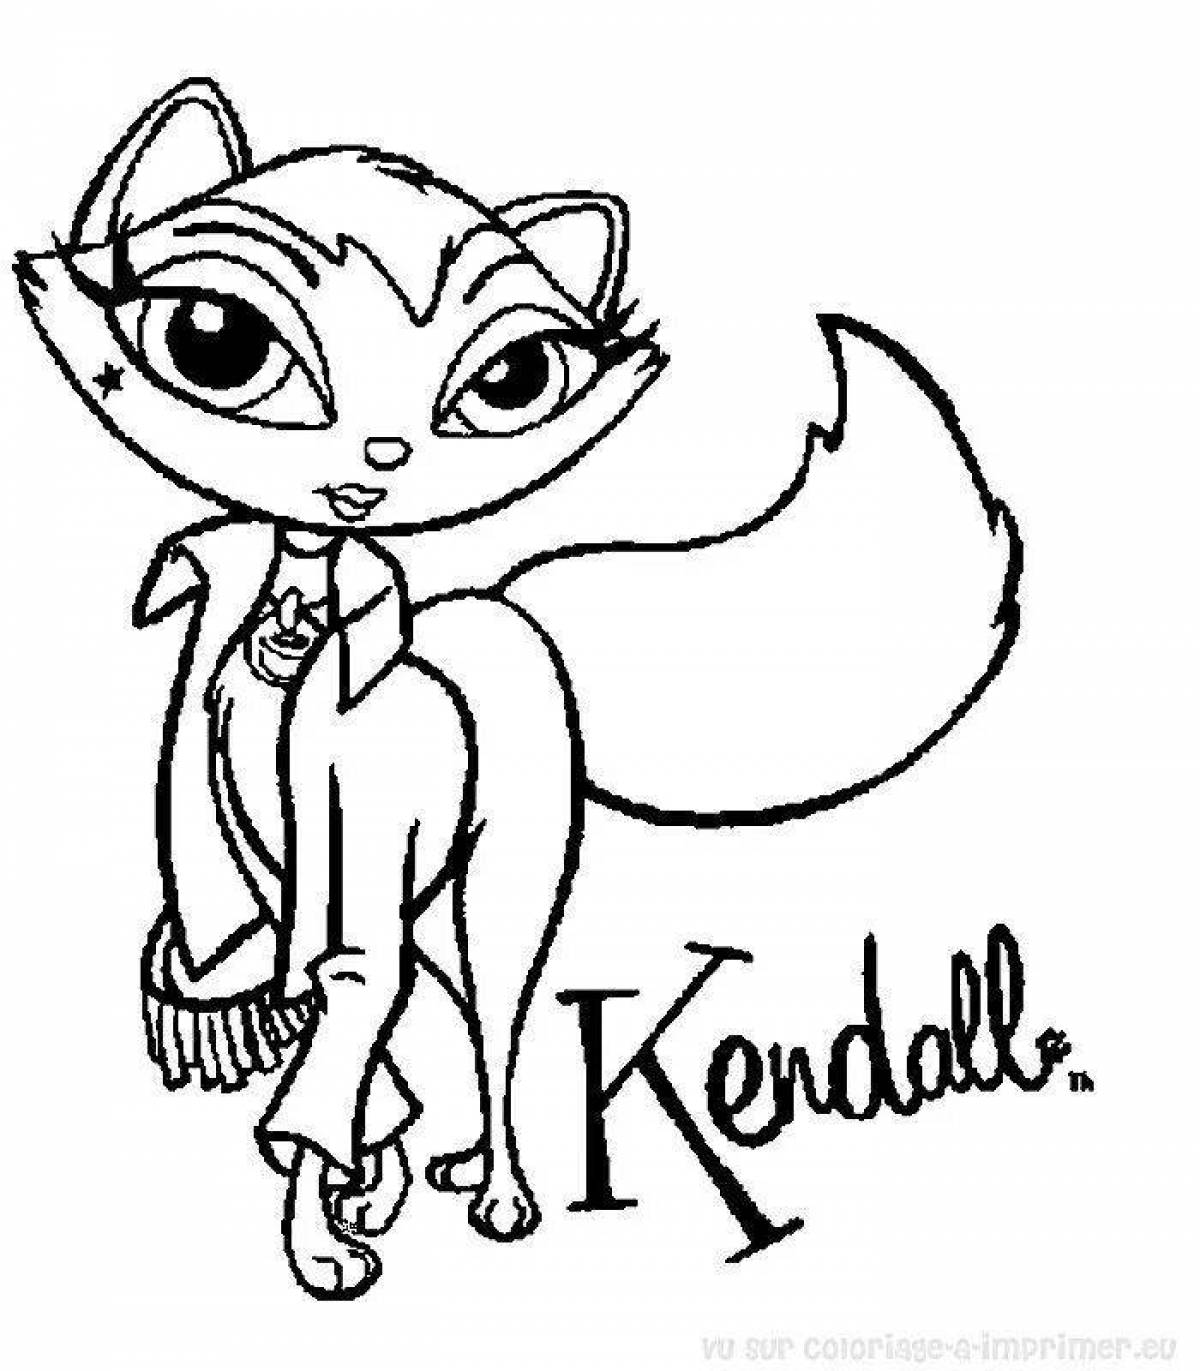 Angela kitty's animated coloring page